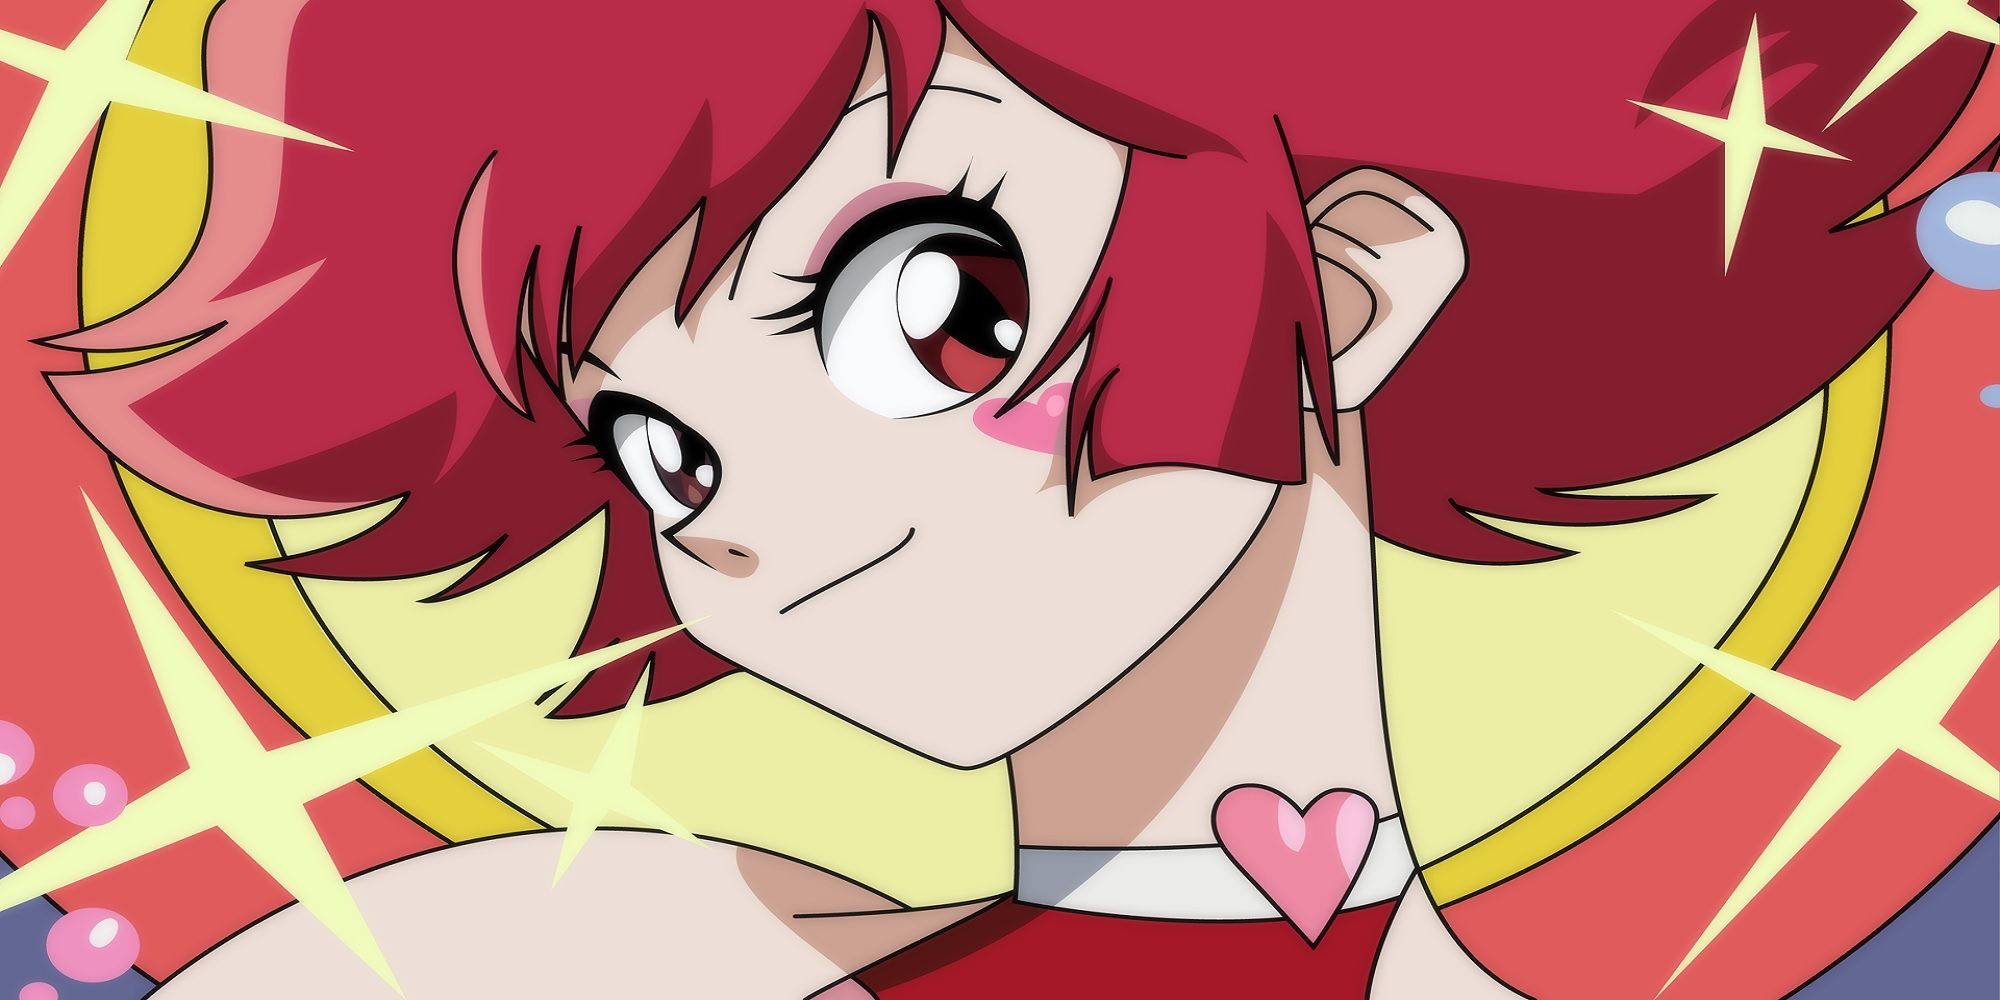 The protagonist of Cutie Honey grinning at the camera.